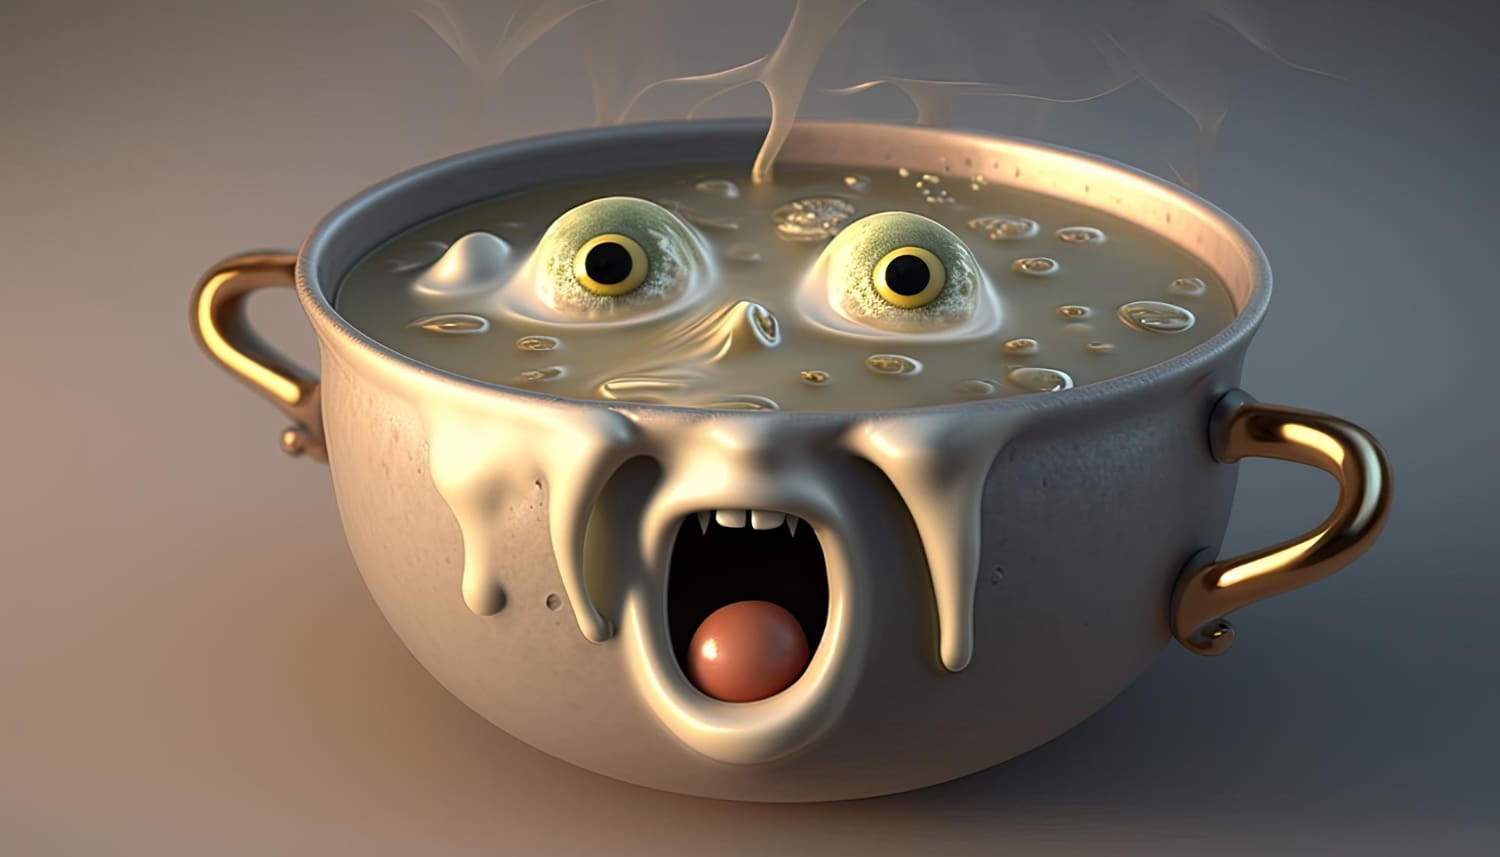 bowl soup with face that has eyes mouth wide open